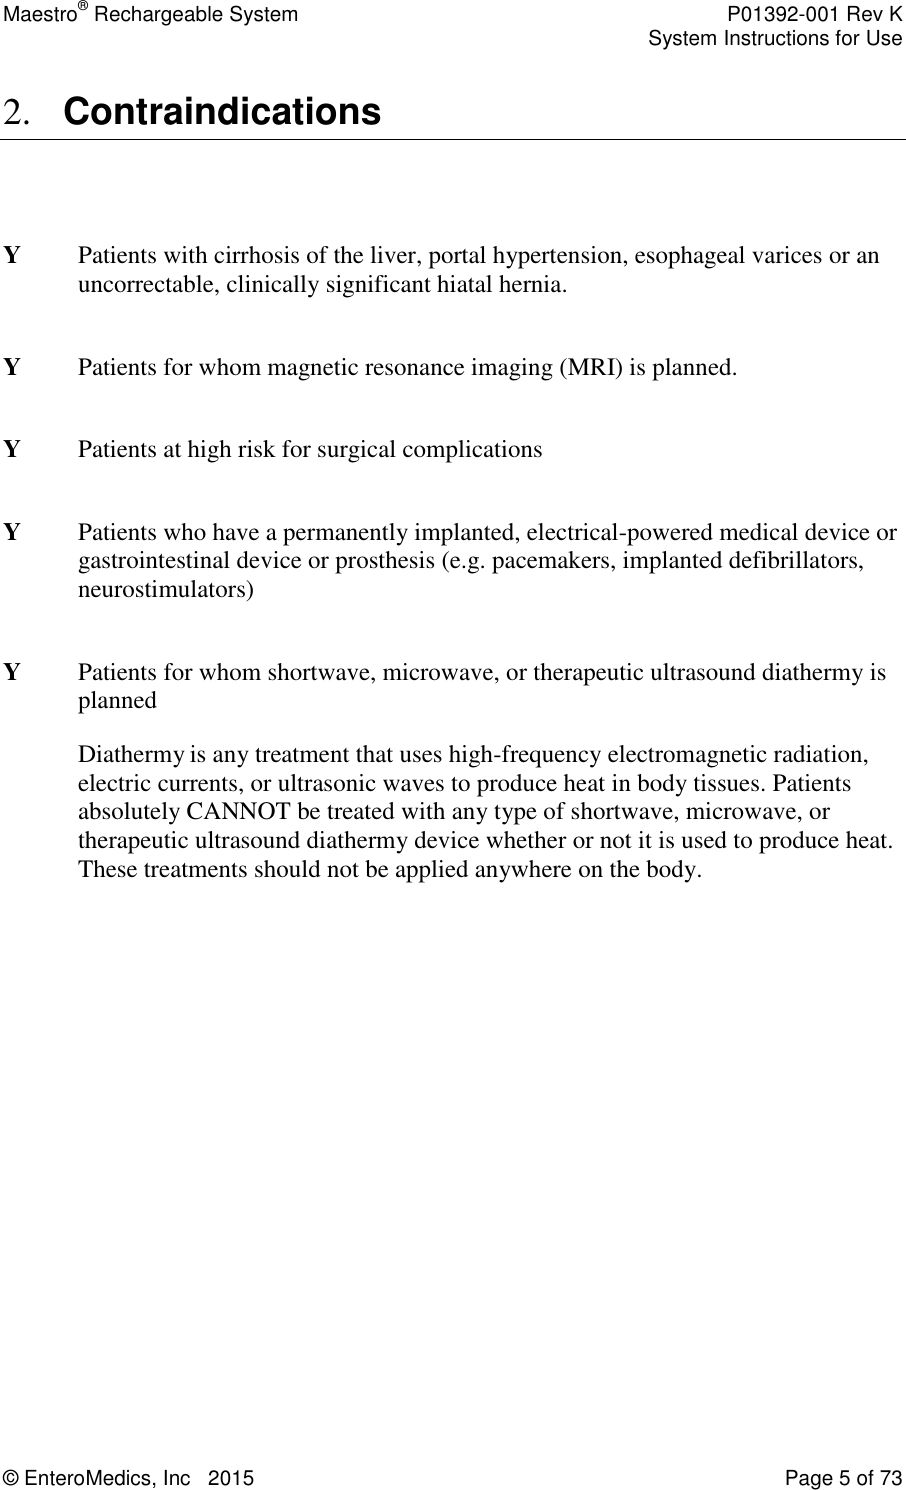 Maestro® Rechargeable System    P01392-001 Rev K     System Instructions for Use  © EnteroMedics, Inc   2015  Page 5 of 73  2. Contraindications   Y  Patients with cirrhosis of the liver, portal hypertension, esophageal varices or an uncorrectable, clinically significant hiatal hernia.   Y  Patients for whom magnetic resonance imaging (MRI) is planned.  Y  Patients at high risk for surgical complications  Y  Patients who have a permanently implanted, electrical-powered medical device or gastrointestinal device or prosthesis (e.g. pacemakers, implanted defibrillators, neurostimulators)  Y  Patients for whom shortwave, microwave, or therapeutic ultrasound diathermy is planned Diathermy is any treatment that uses high-frequency electromagnetic radiation, electric currents, or ultrasonic waves to produce heat in body tissues. Patients absolutely CANNOT be treated with any type of shortwave, microwave, or therapeutic ultrasound diathermy device whether or not it is used to produce heat. These treatments should not be applied anywhere on the body. 